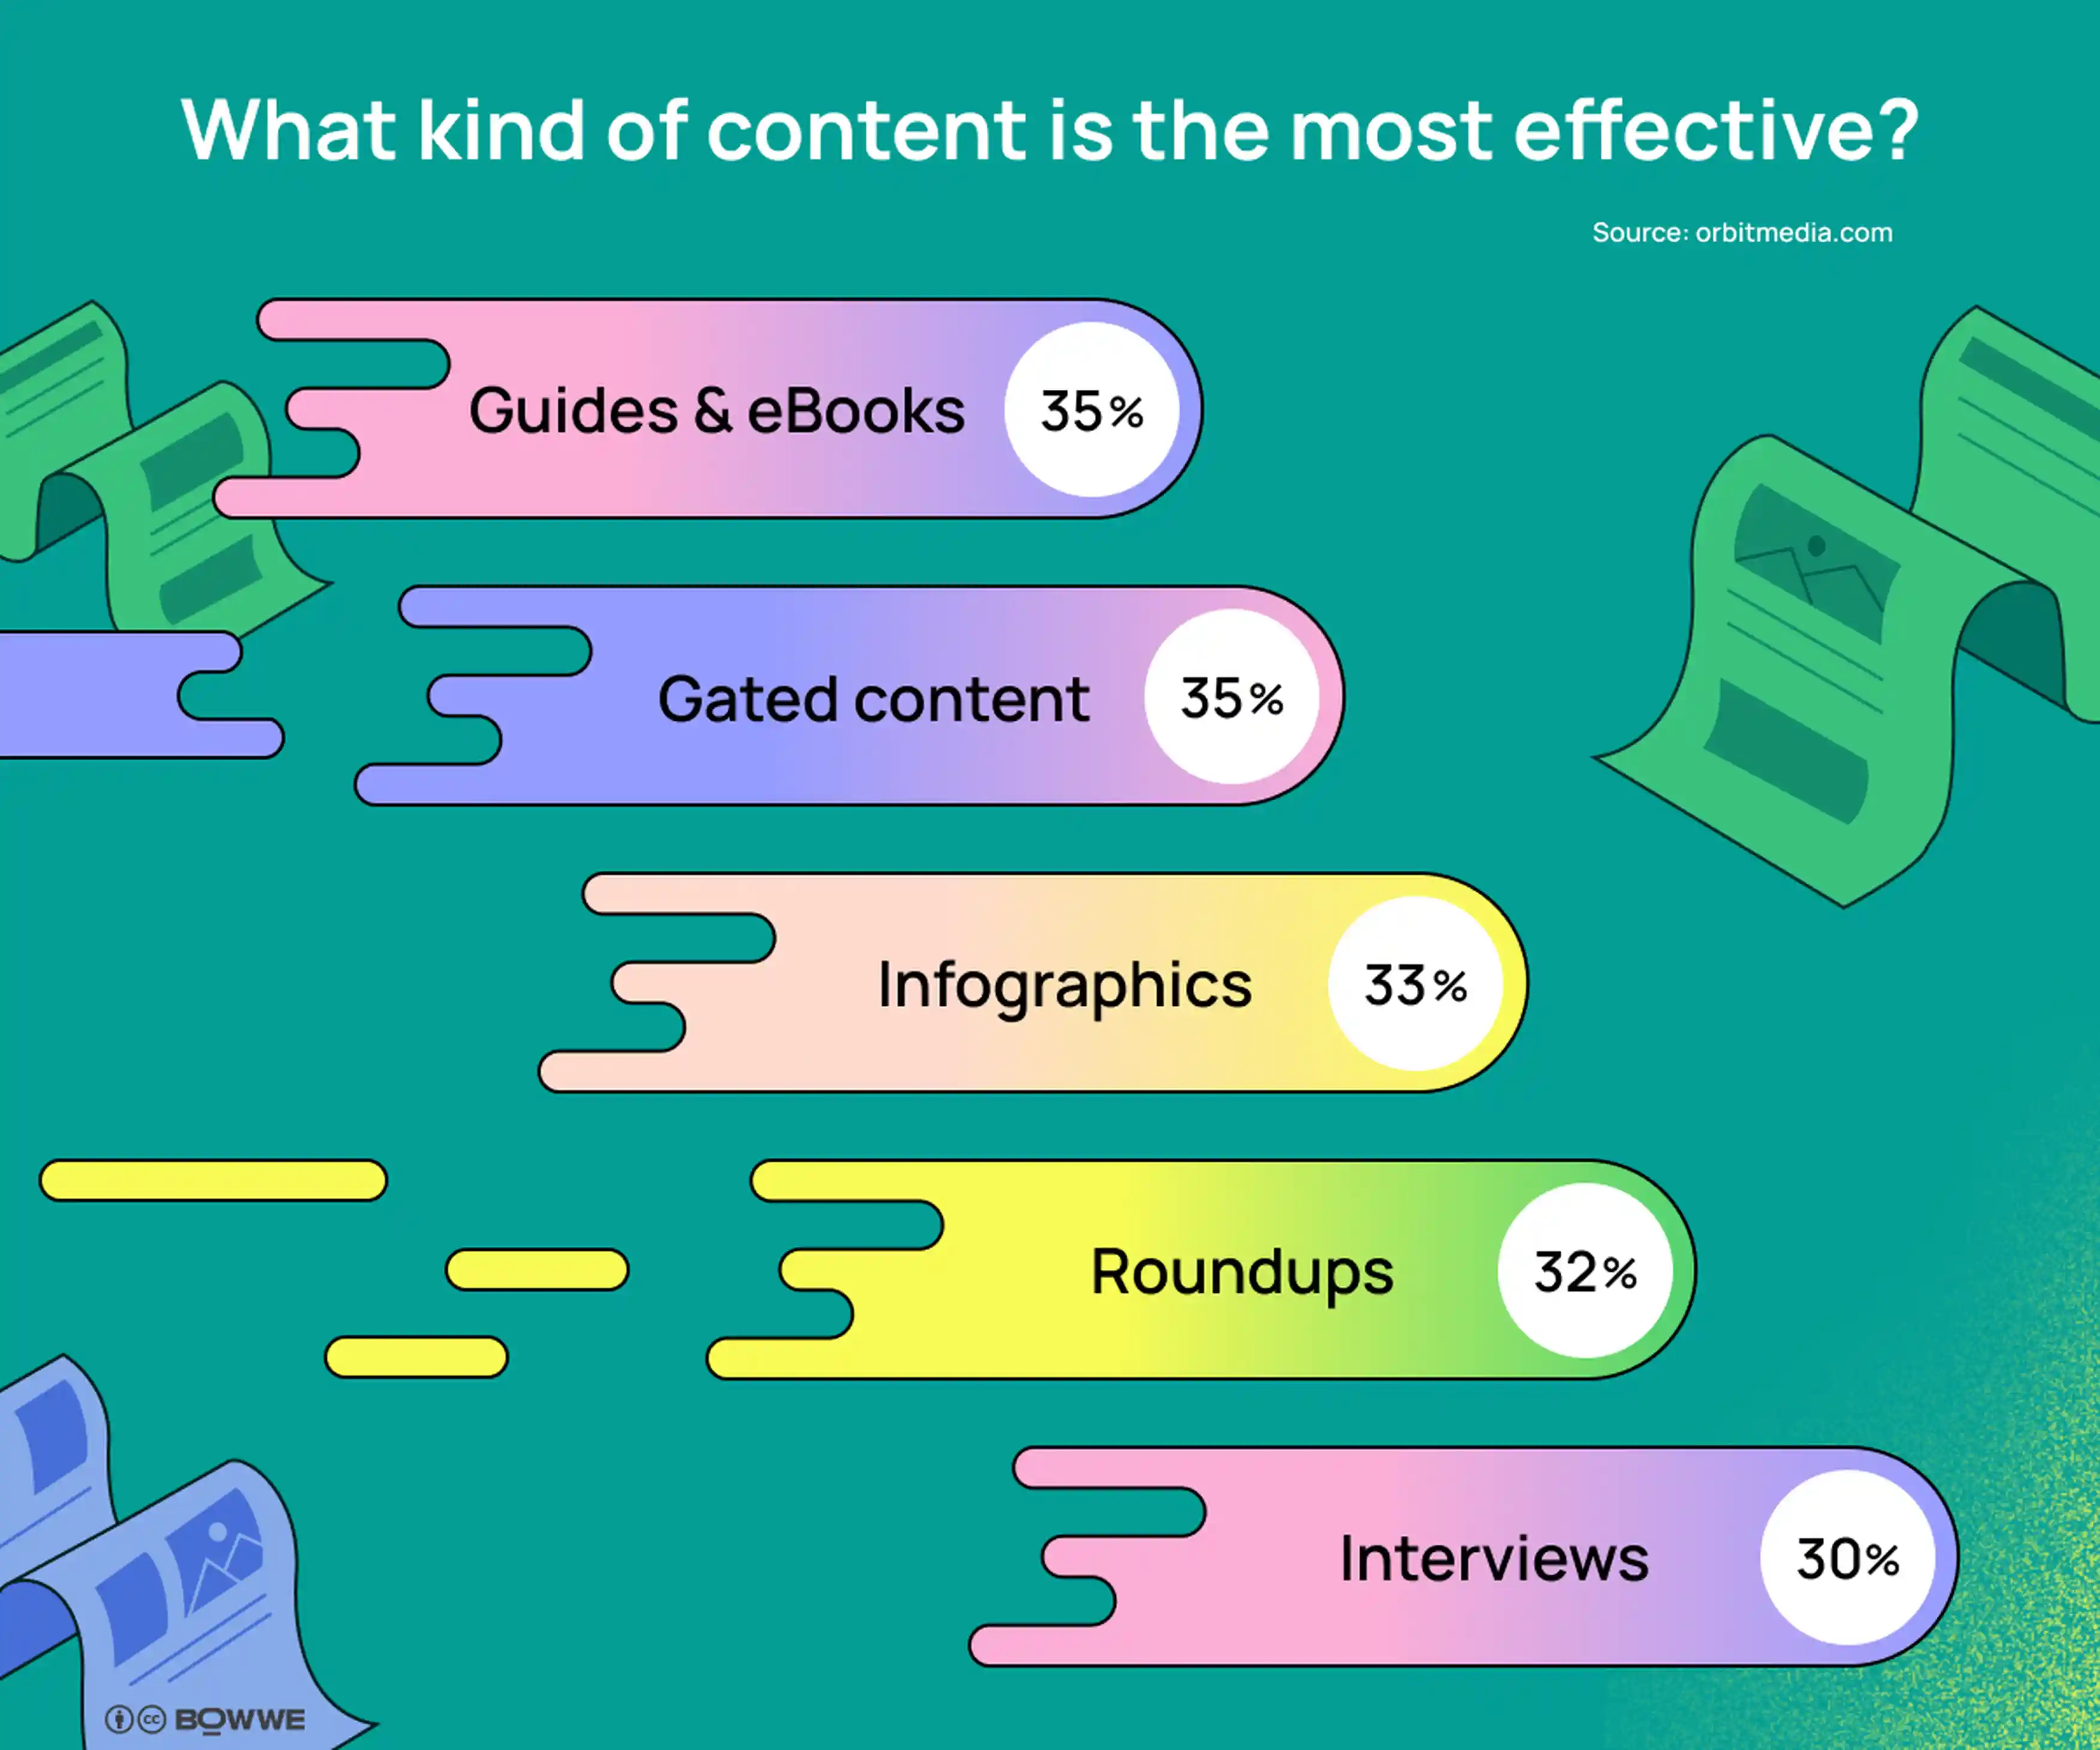 Graphics with a light green background with 5 graphs in dark purple. The headline reads "What kind of content is the most effective?".